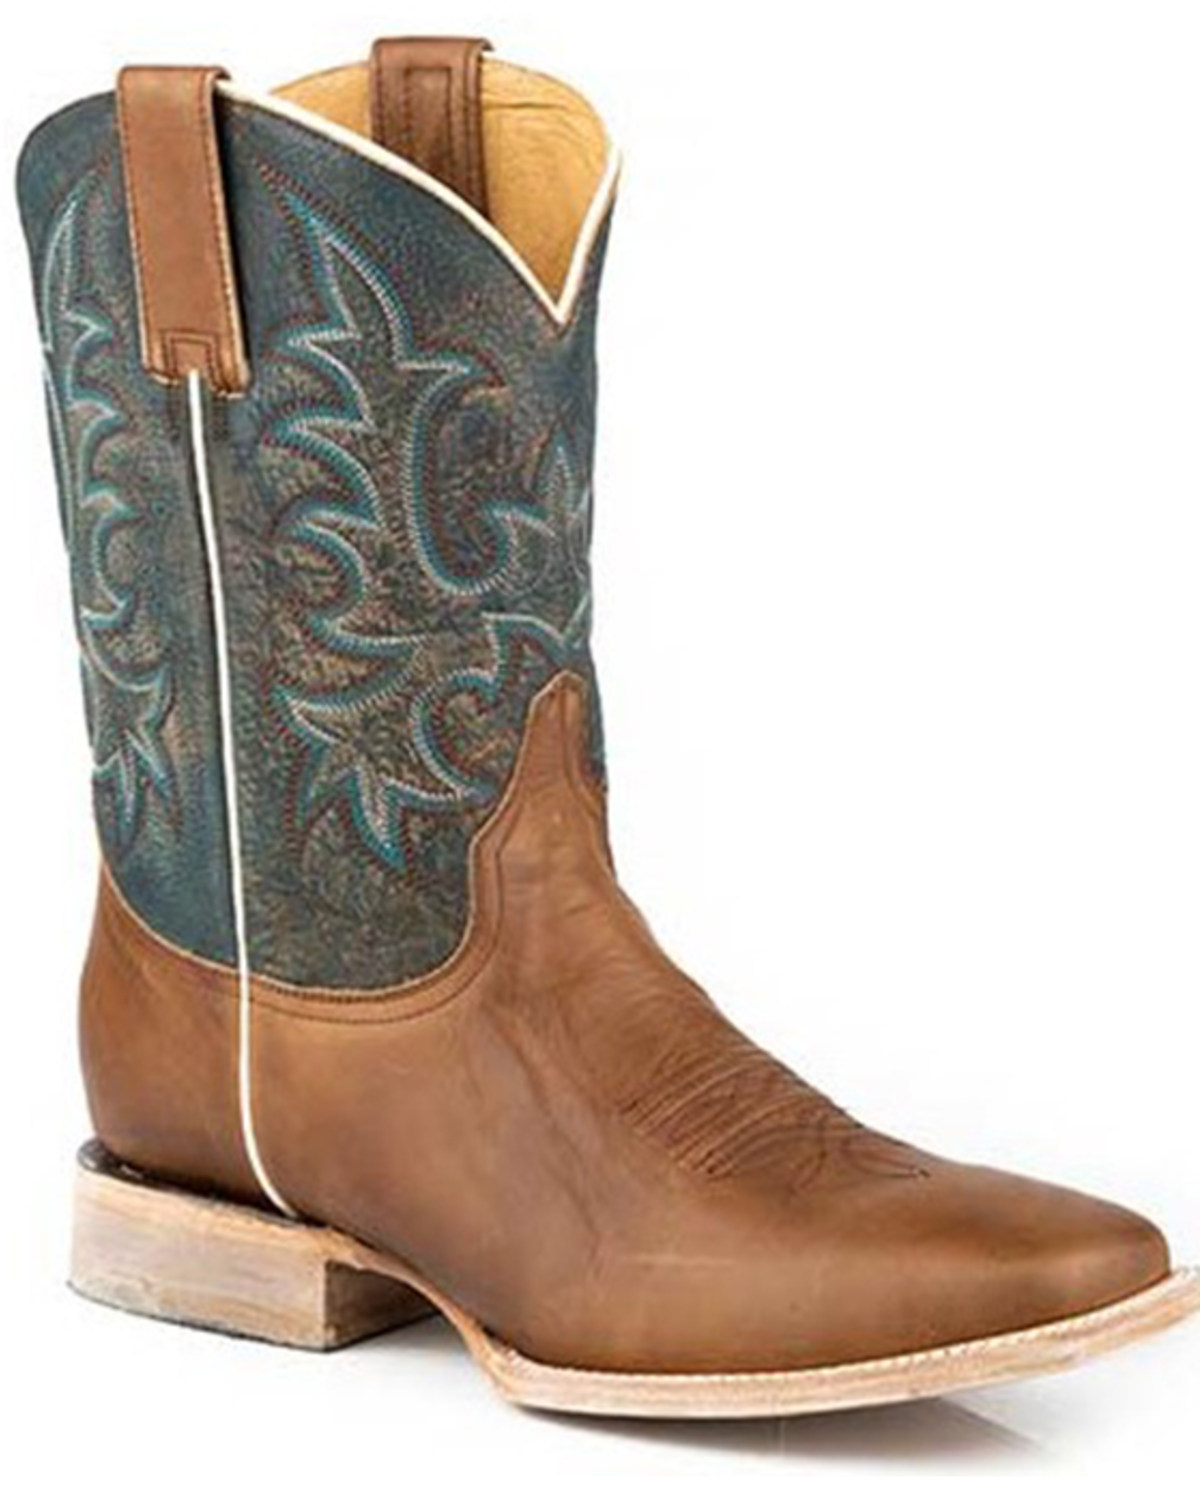 Stetson Men's Obadiah Western Boots - Broad Square Toe